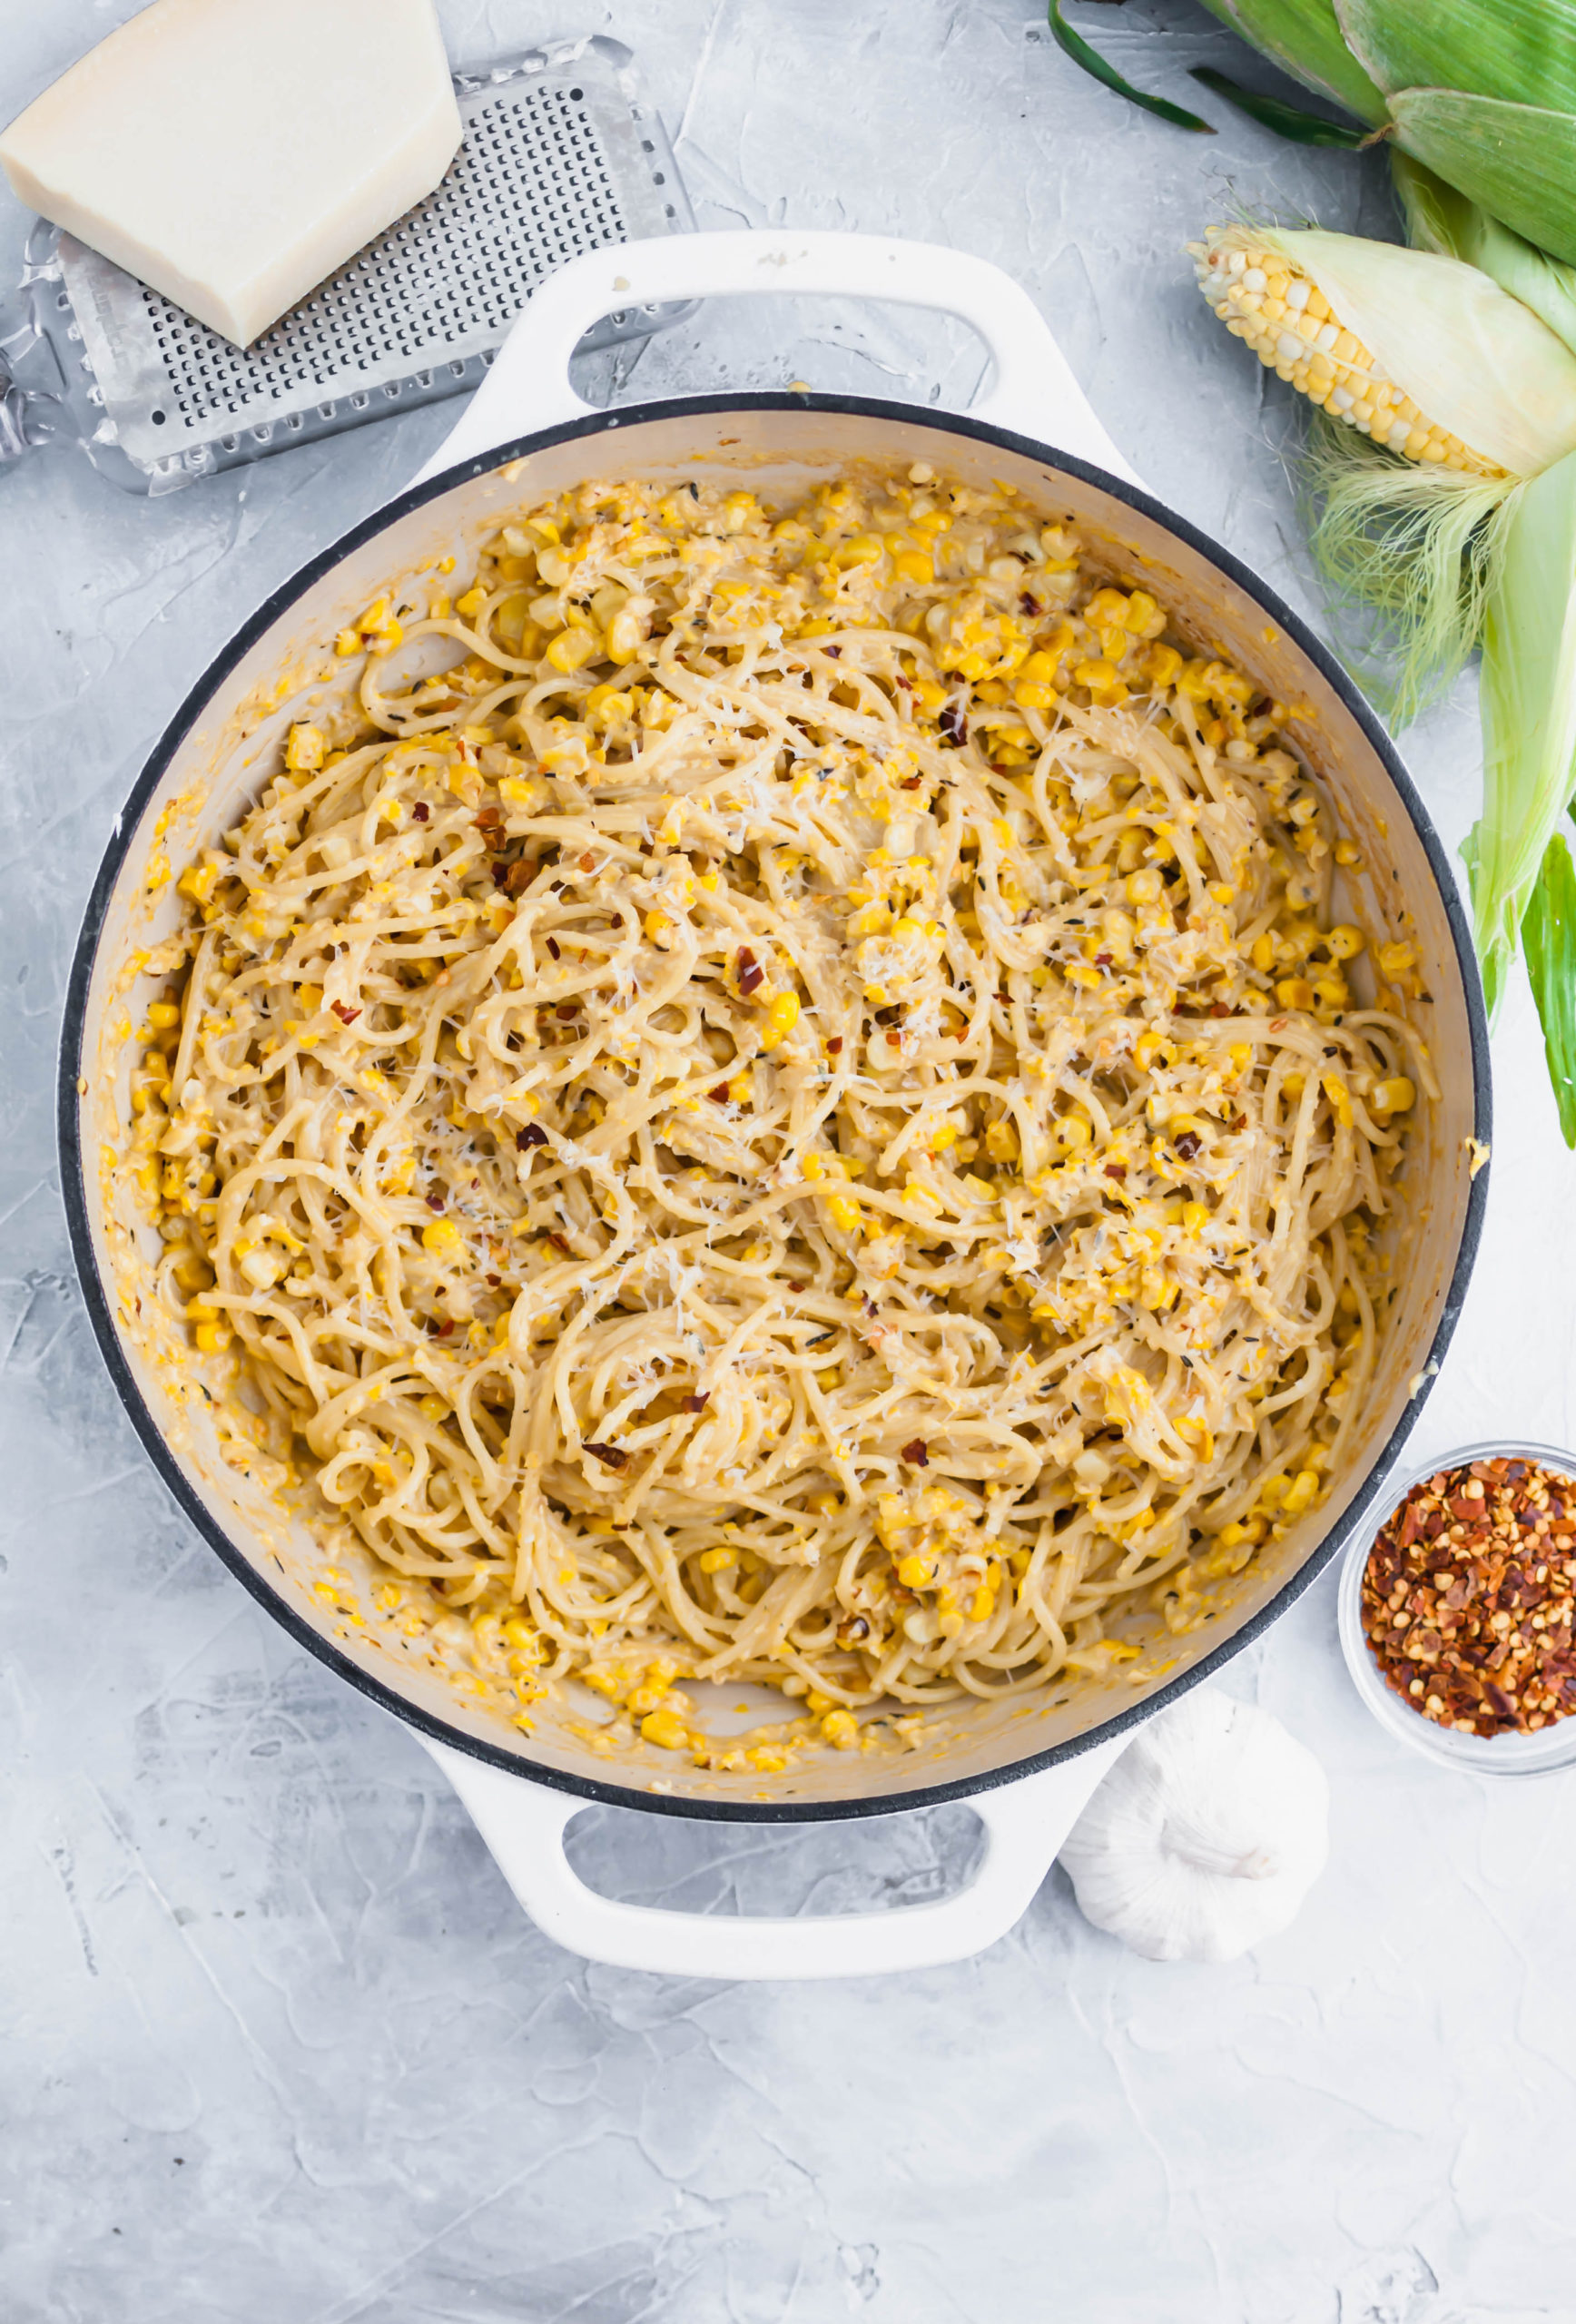 Put all the delicious in season sweet corn to use in this Sweet Corn Pasta. This fun play on alfredo sauce is sure to please the whole family.